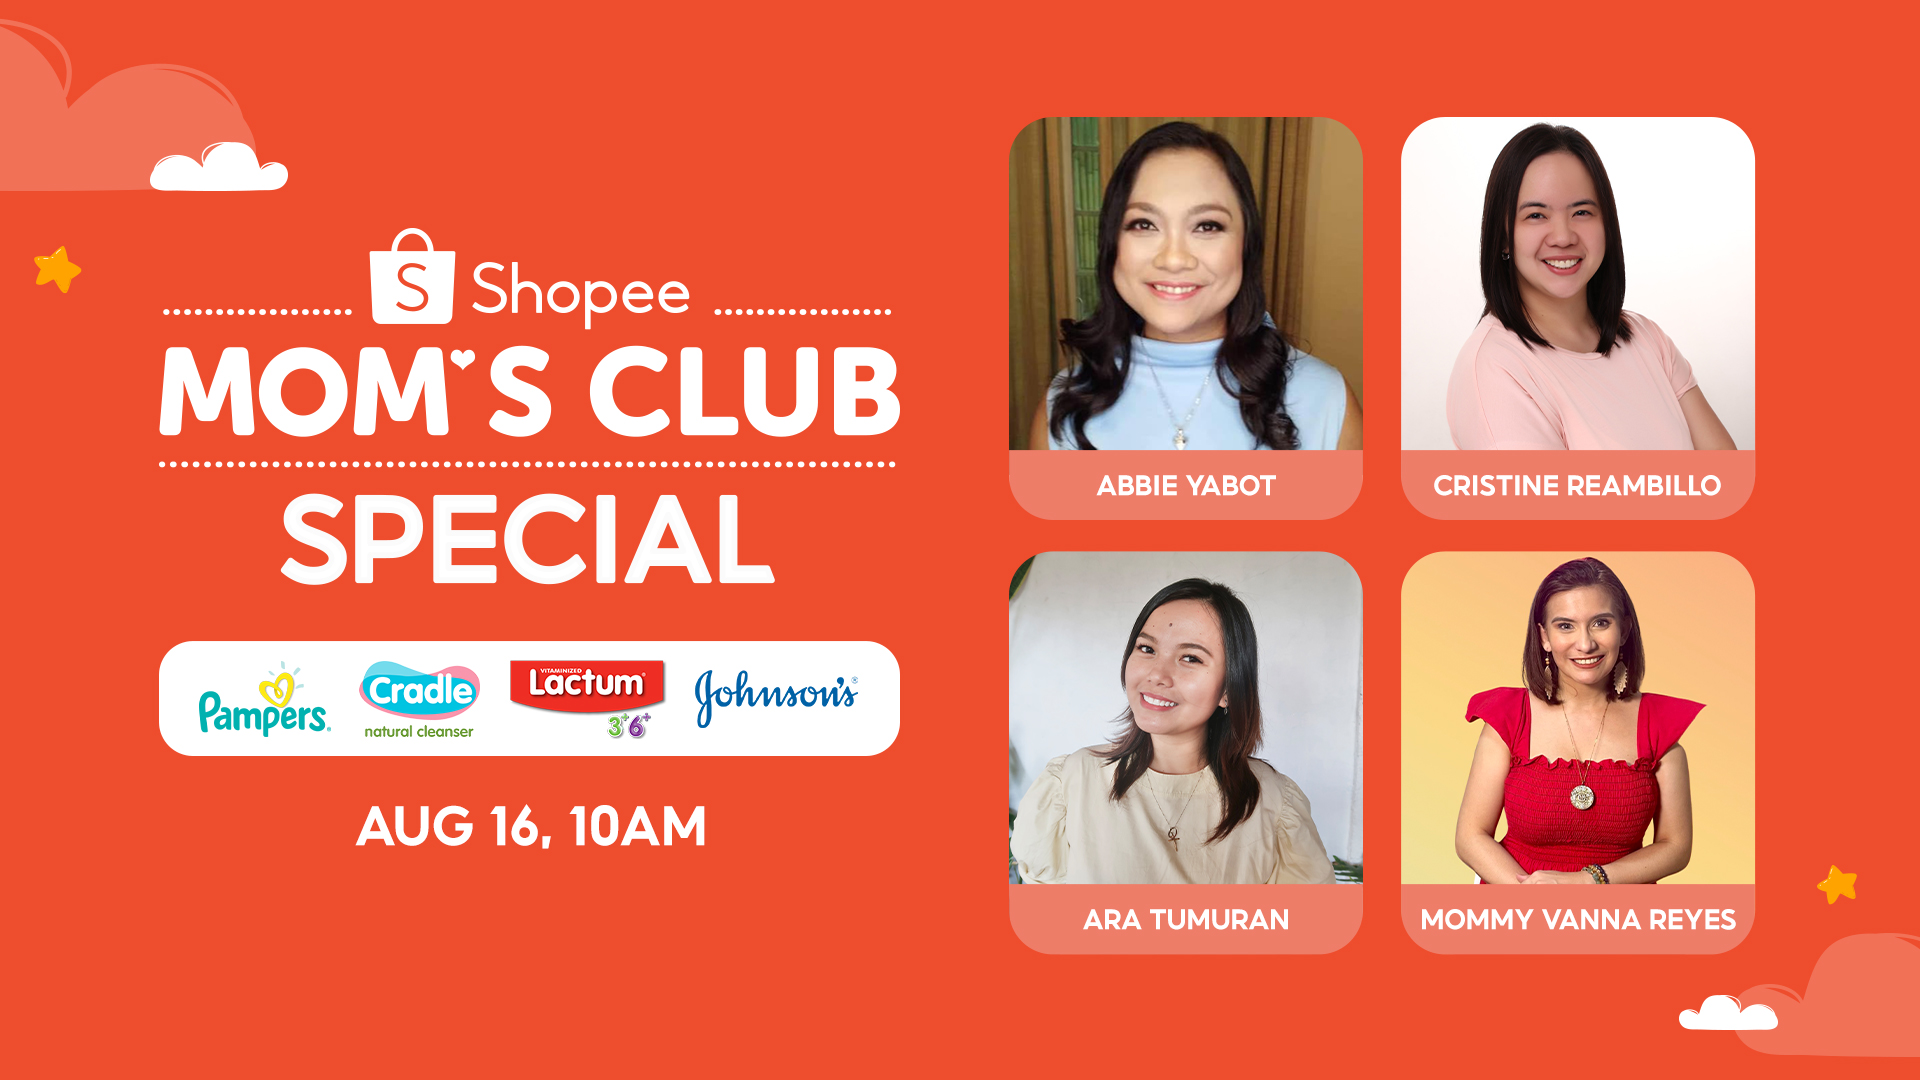 P&G and Shopee inspires home shopping with 'Show Me My Home' experiential  microsite in Southeast Asia